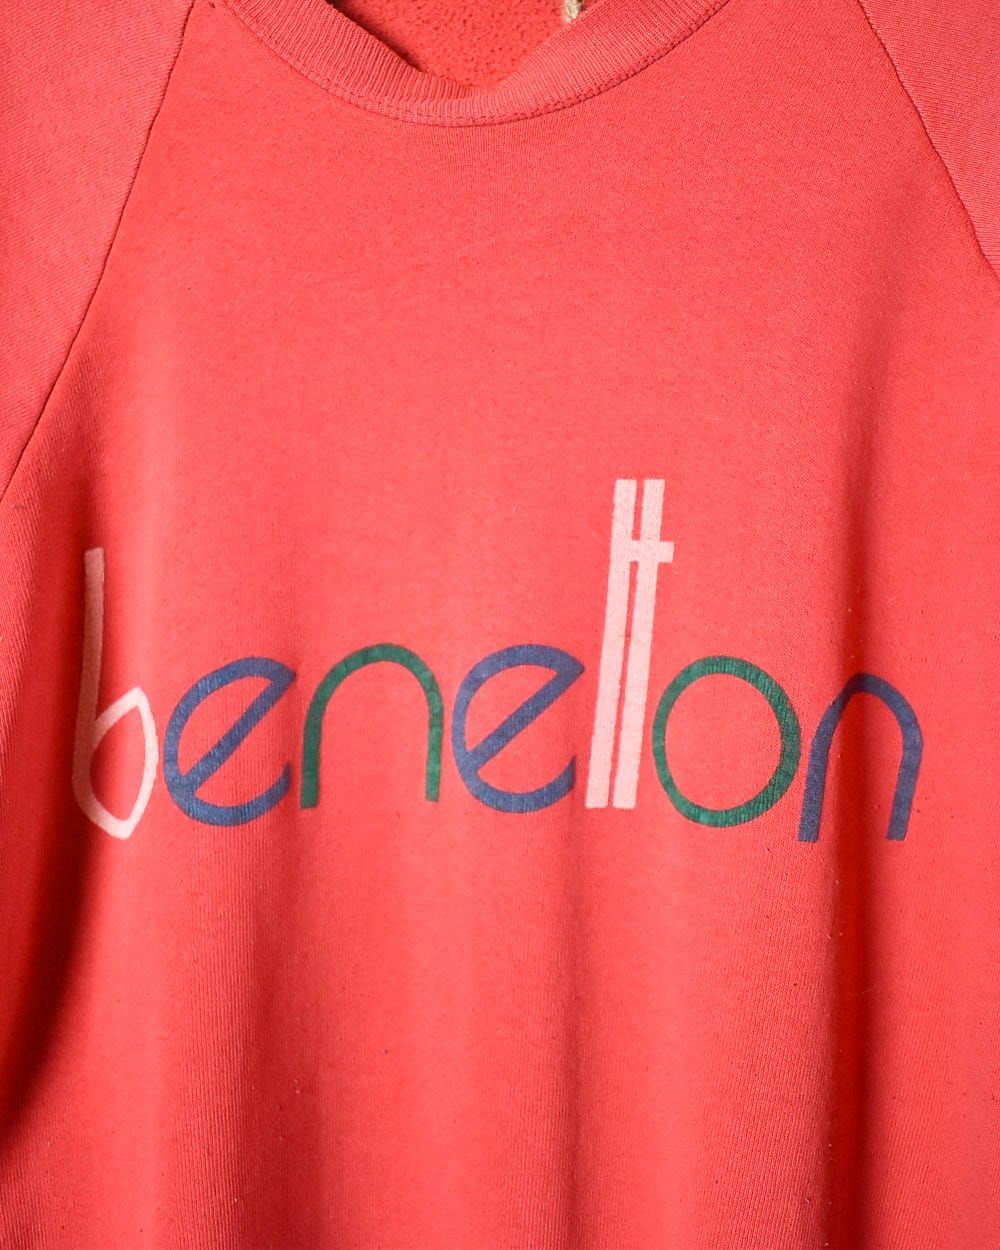 Red United Colors Of Benetton Sweatshirt - Large